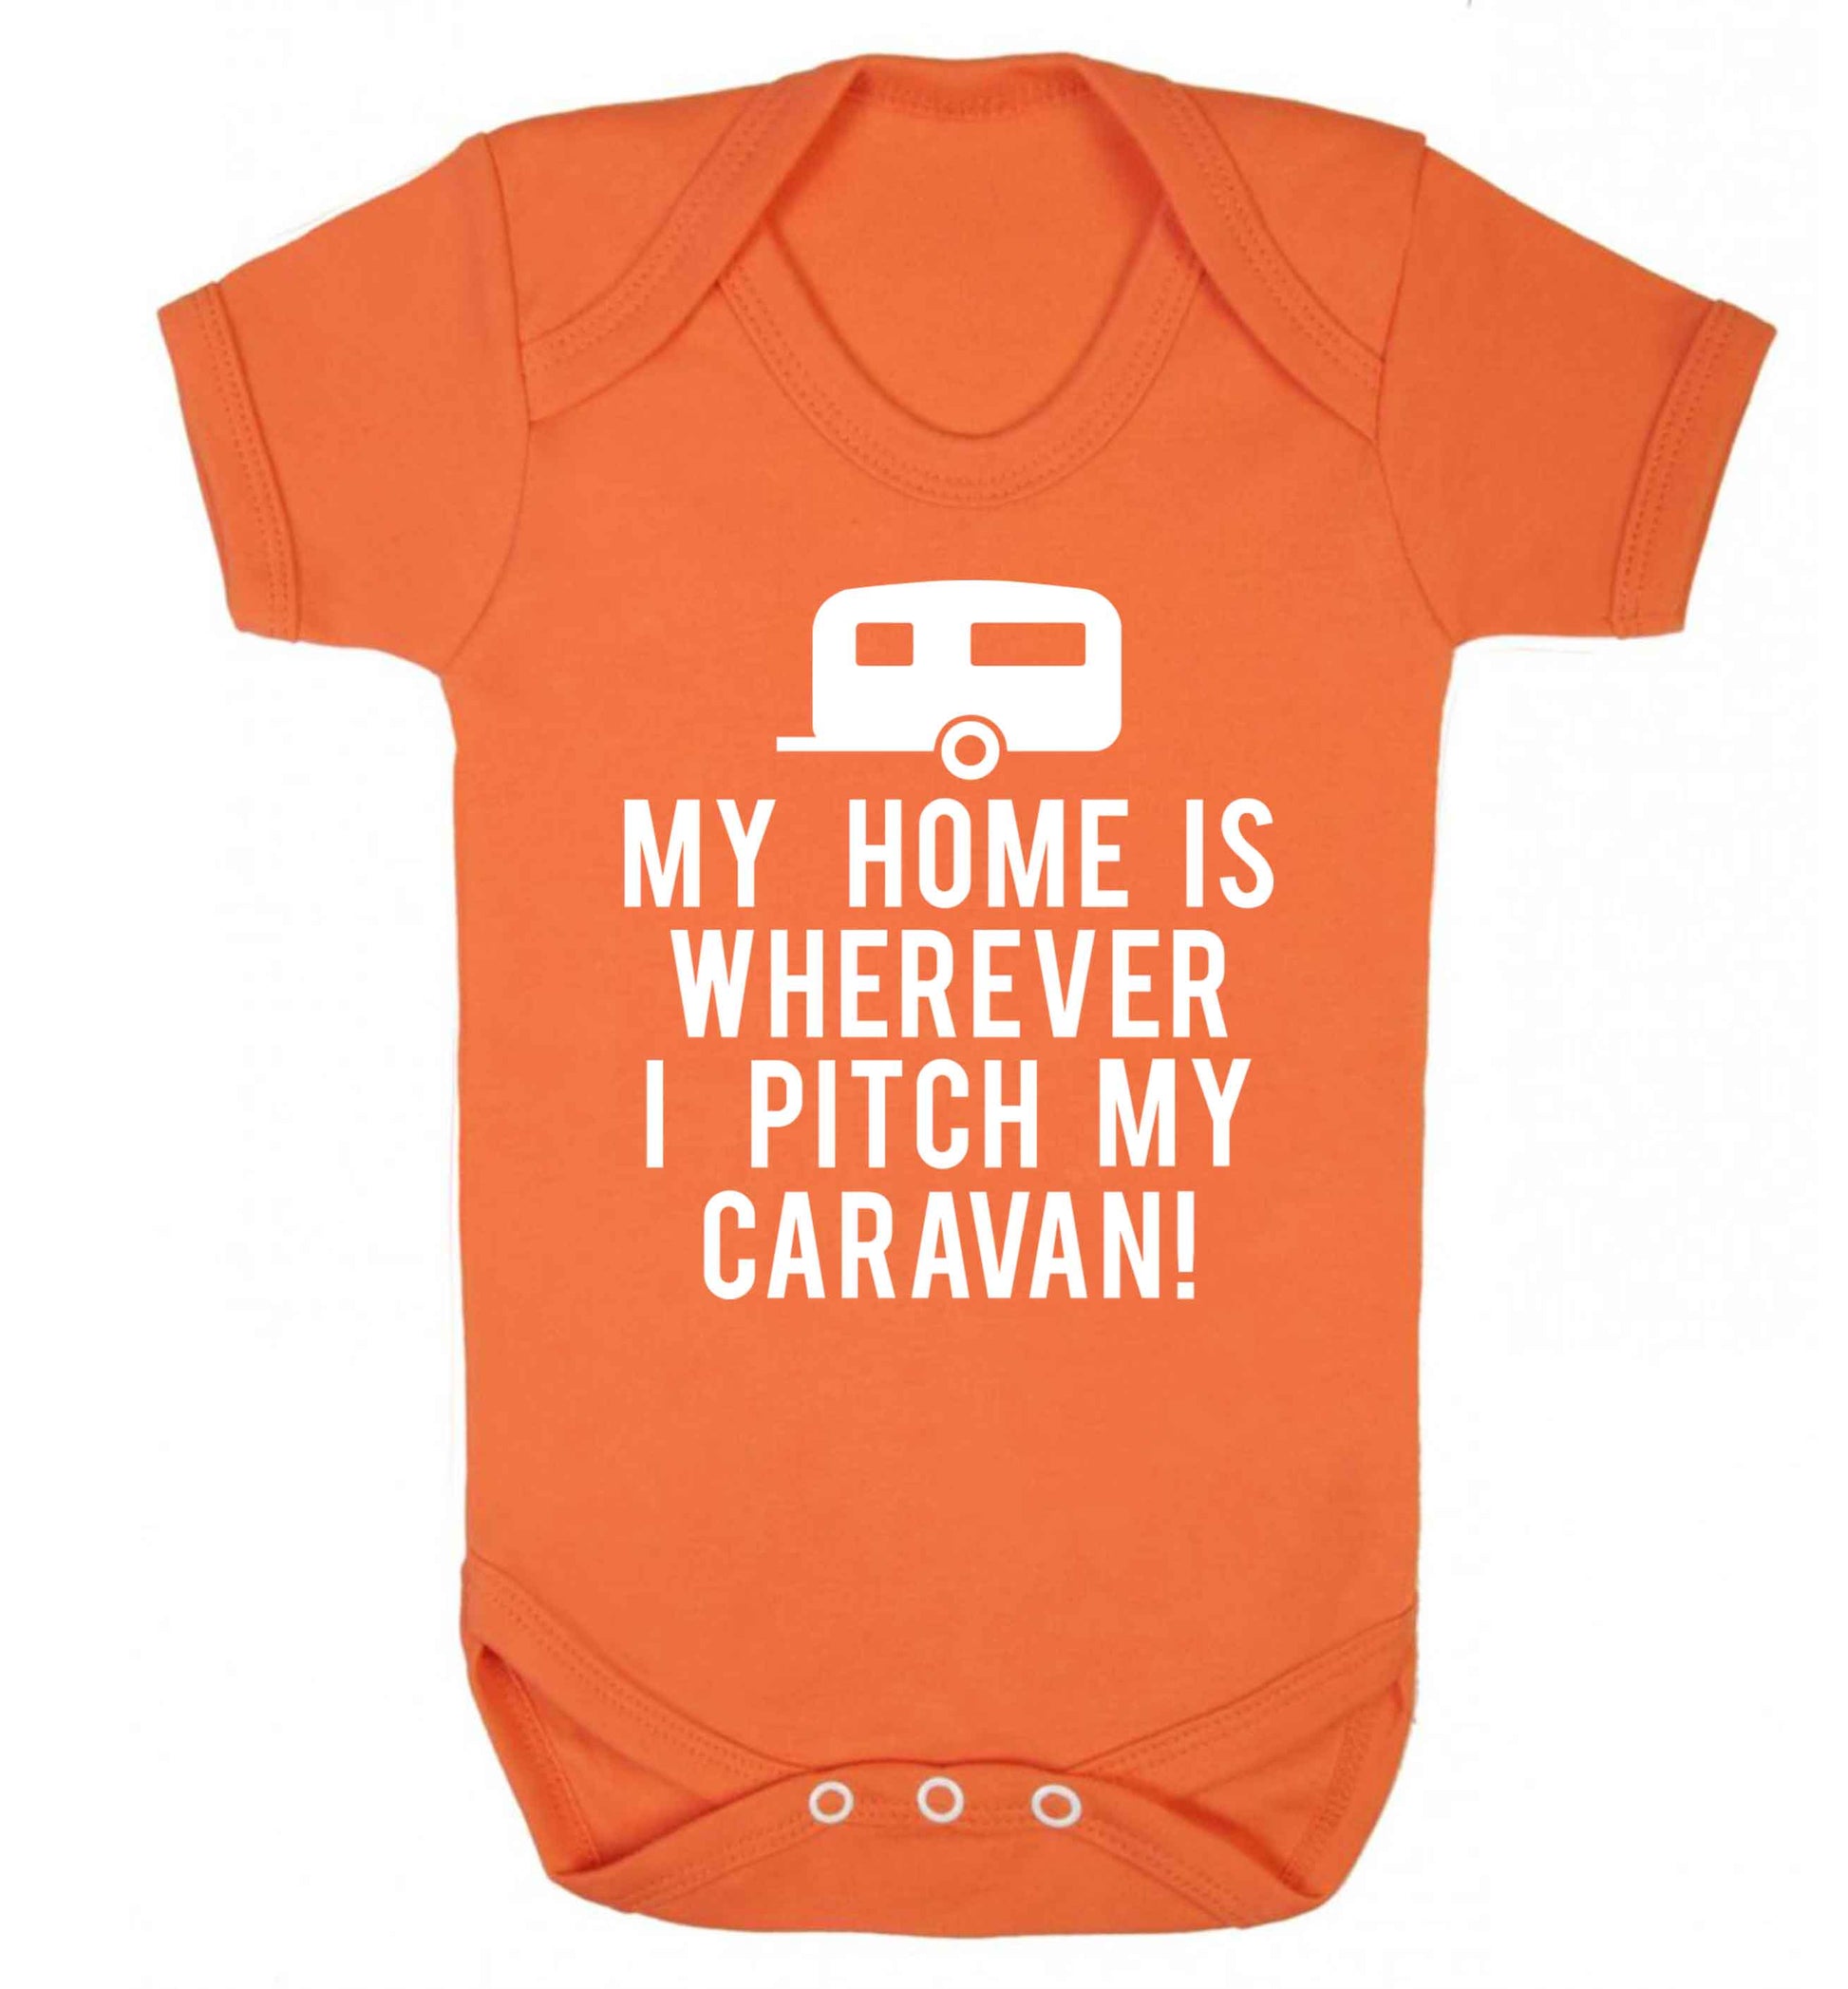 My home is wherever I pitch my caravan Baby Vest orange 18-24 months